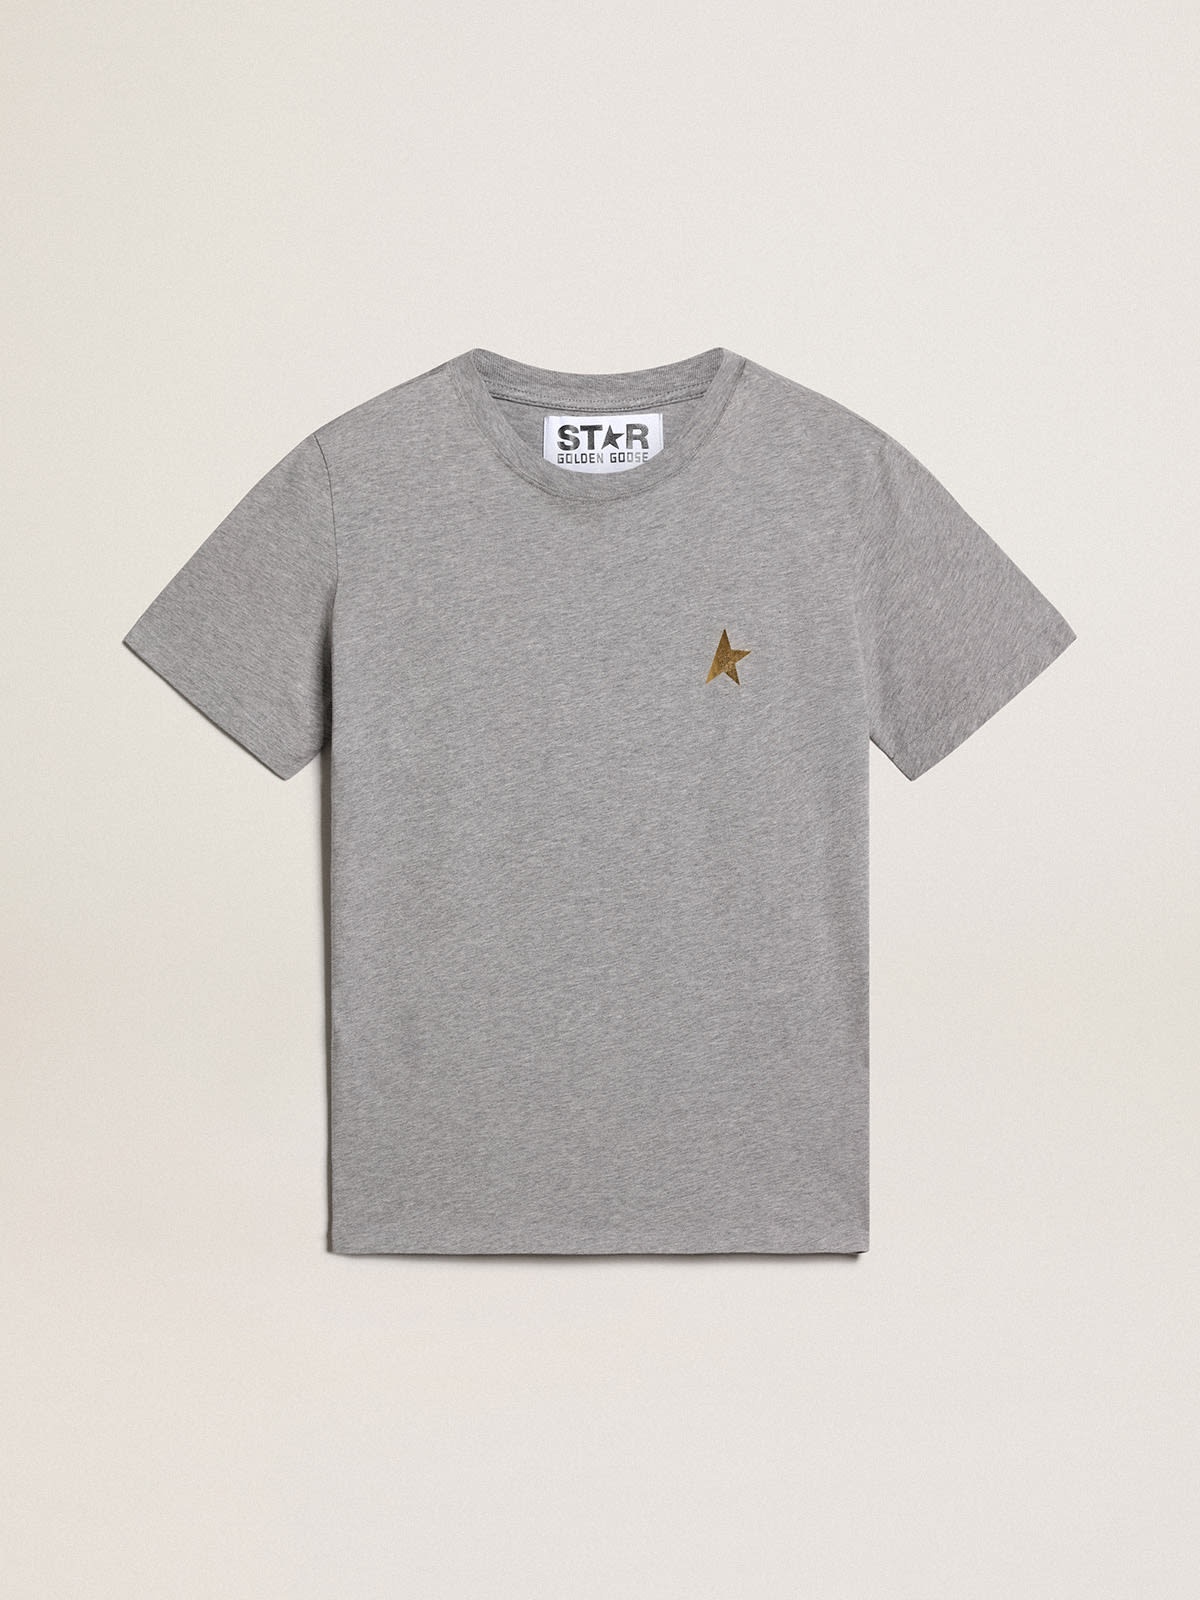 Women's mélange gray T-shirt with gold star on the front - 1